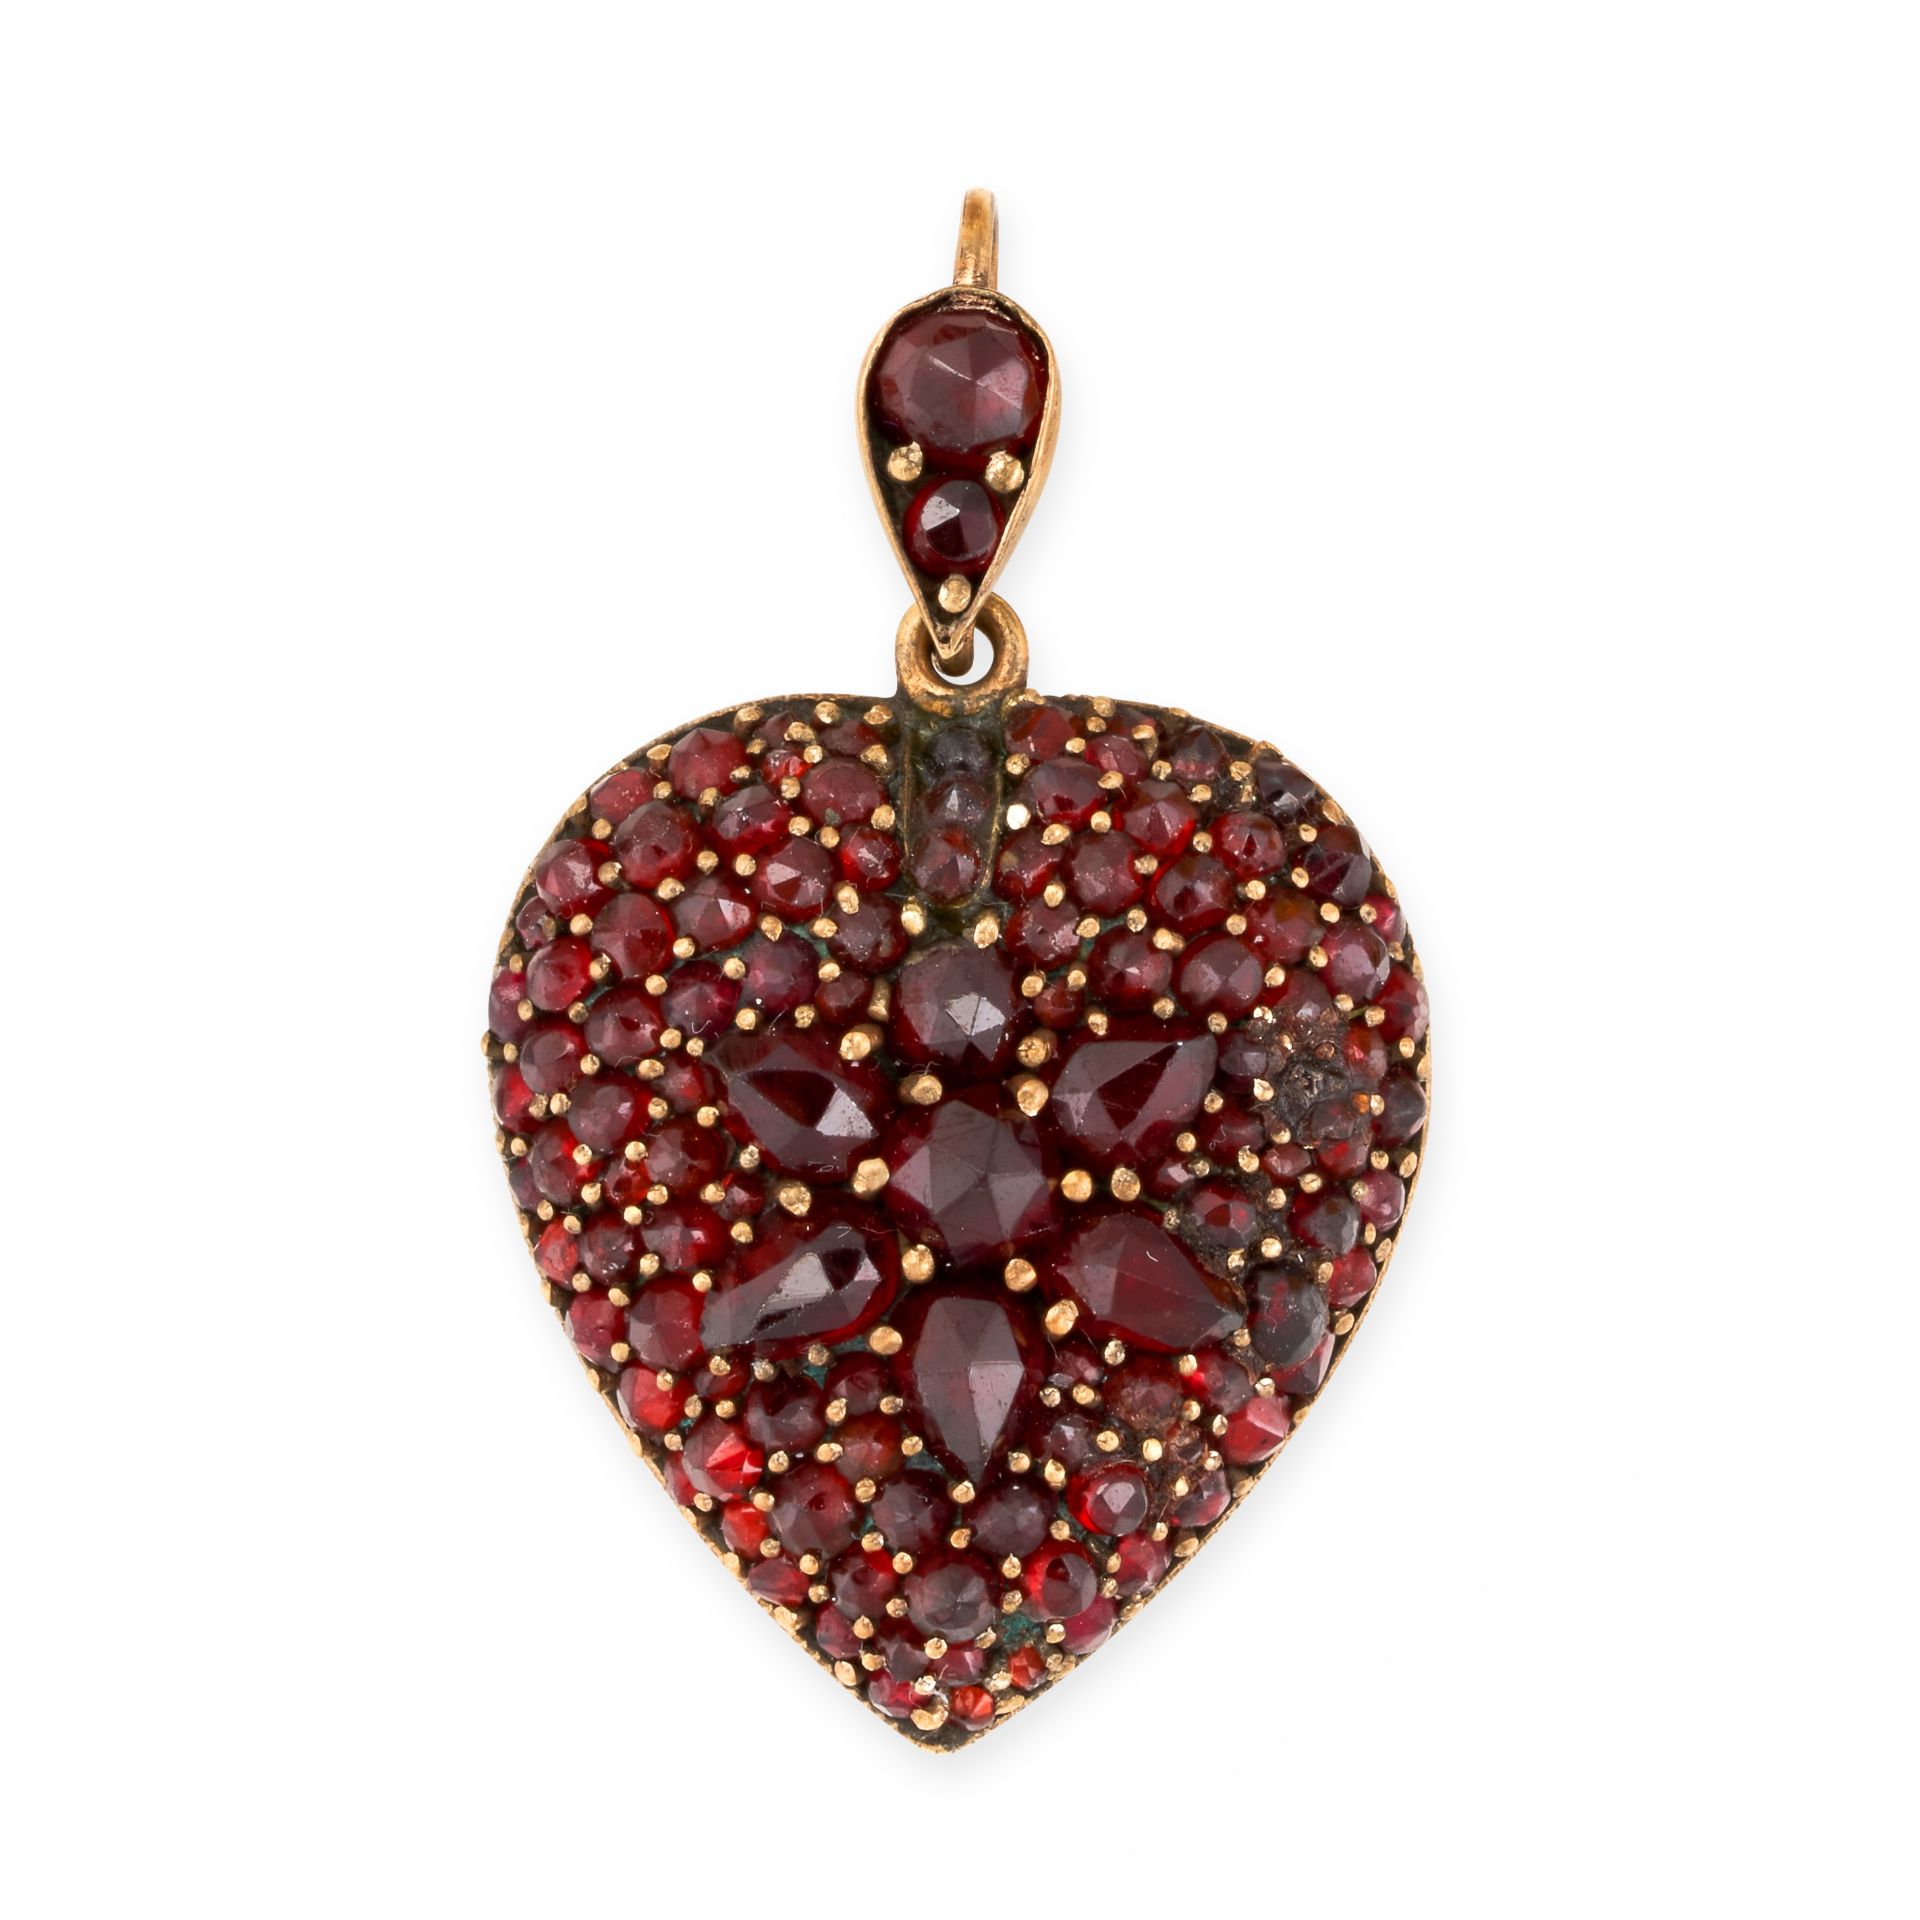 AN ANTIQUE GARNET MOURNING LOCKET PENDANT in the shape of a heart, set to the front with round and